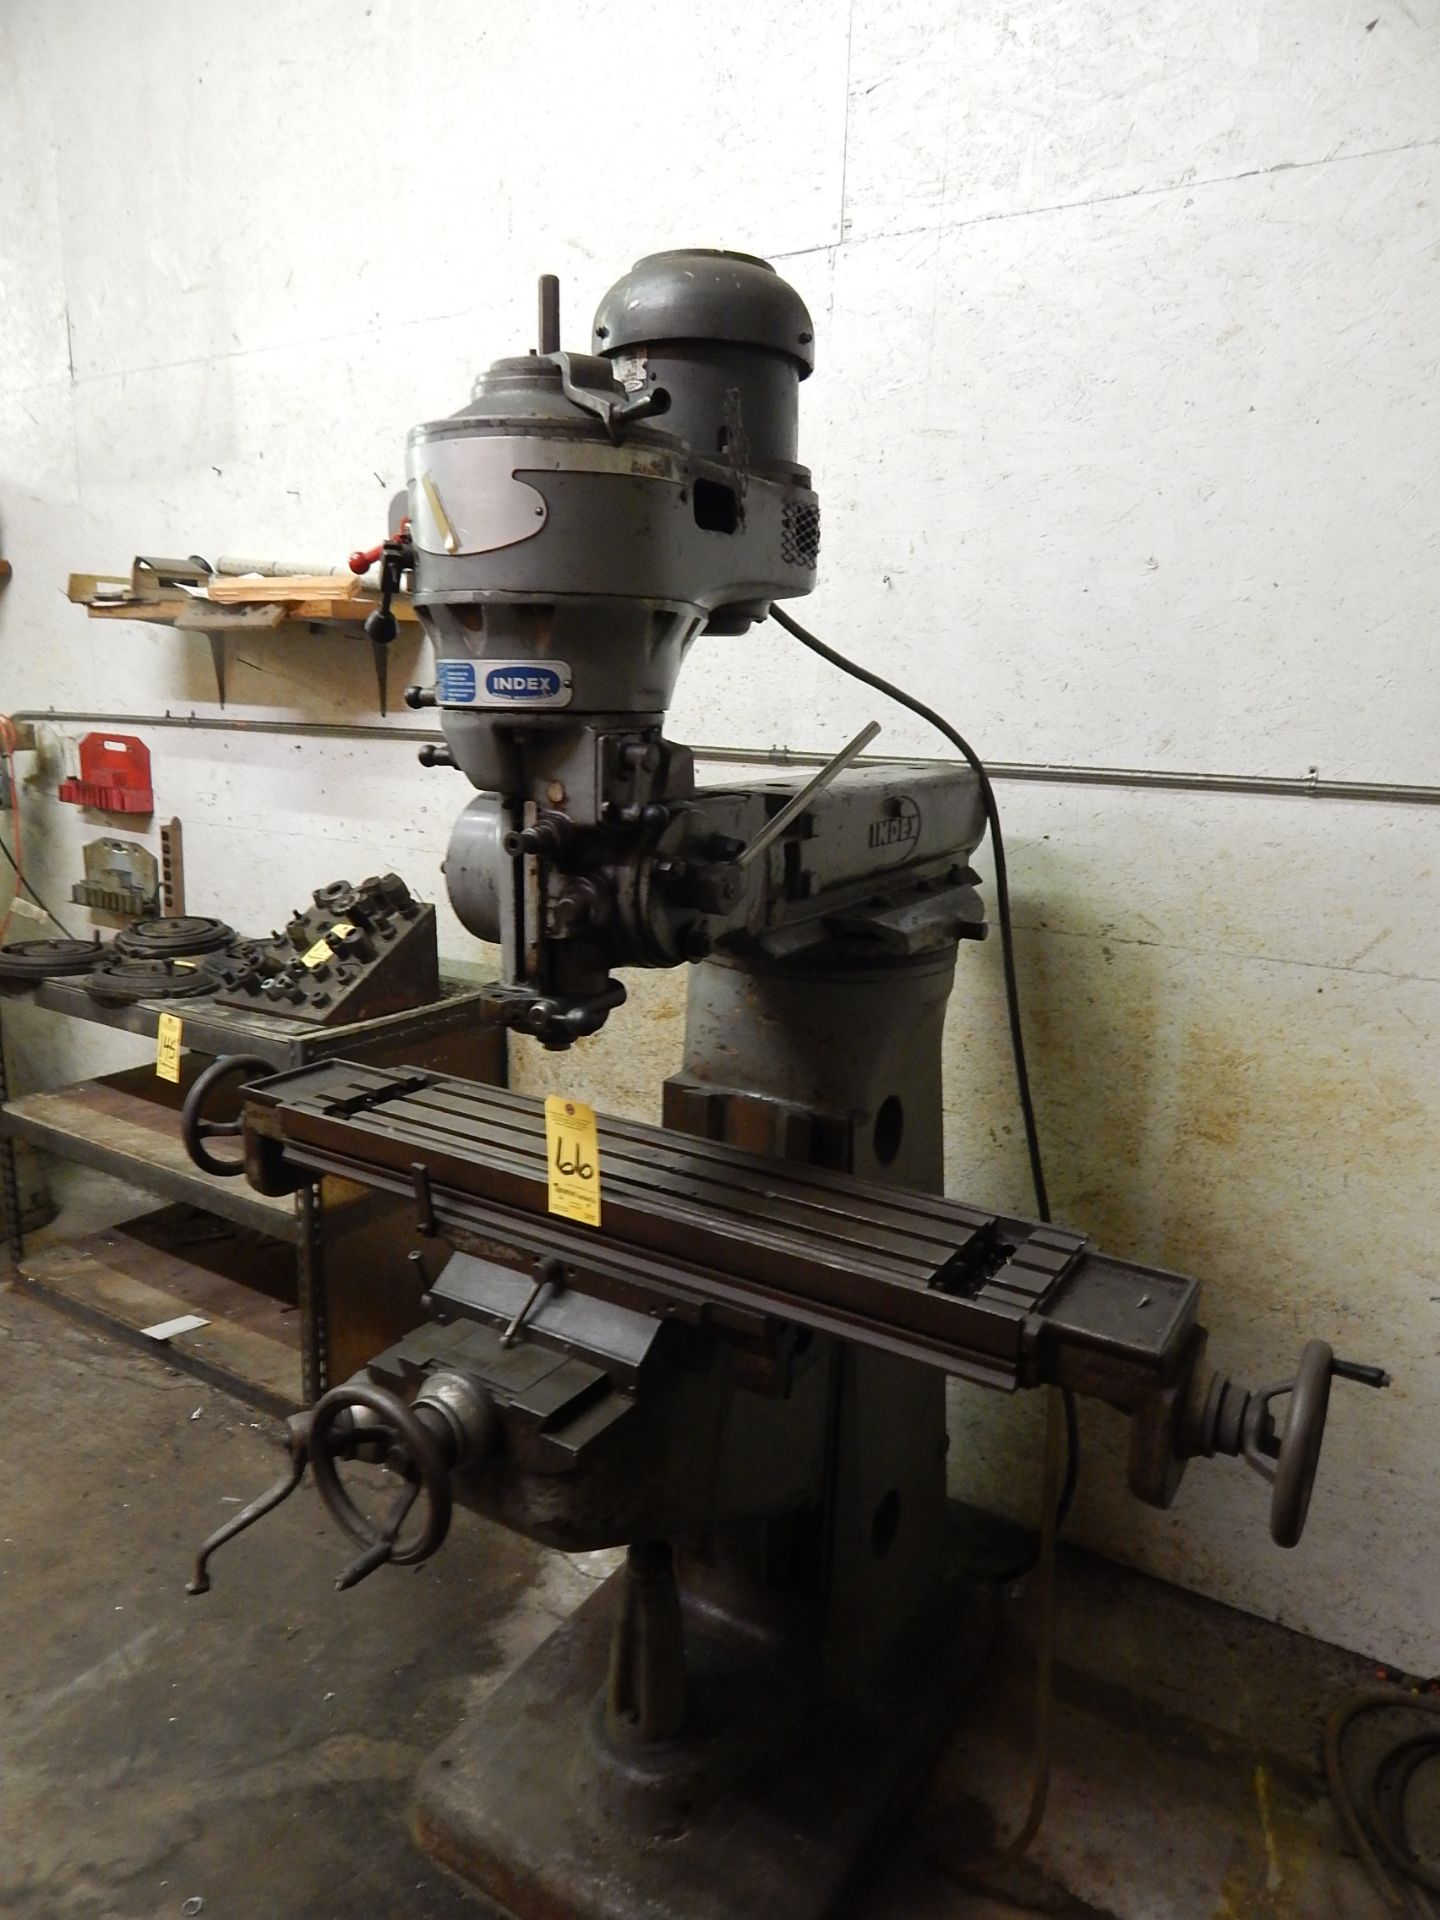 Index Model 747 Vertical Mill, s/n 15555, Loading Fee $150.00 - Image 4 of 4